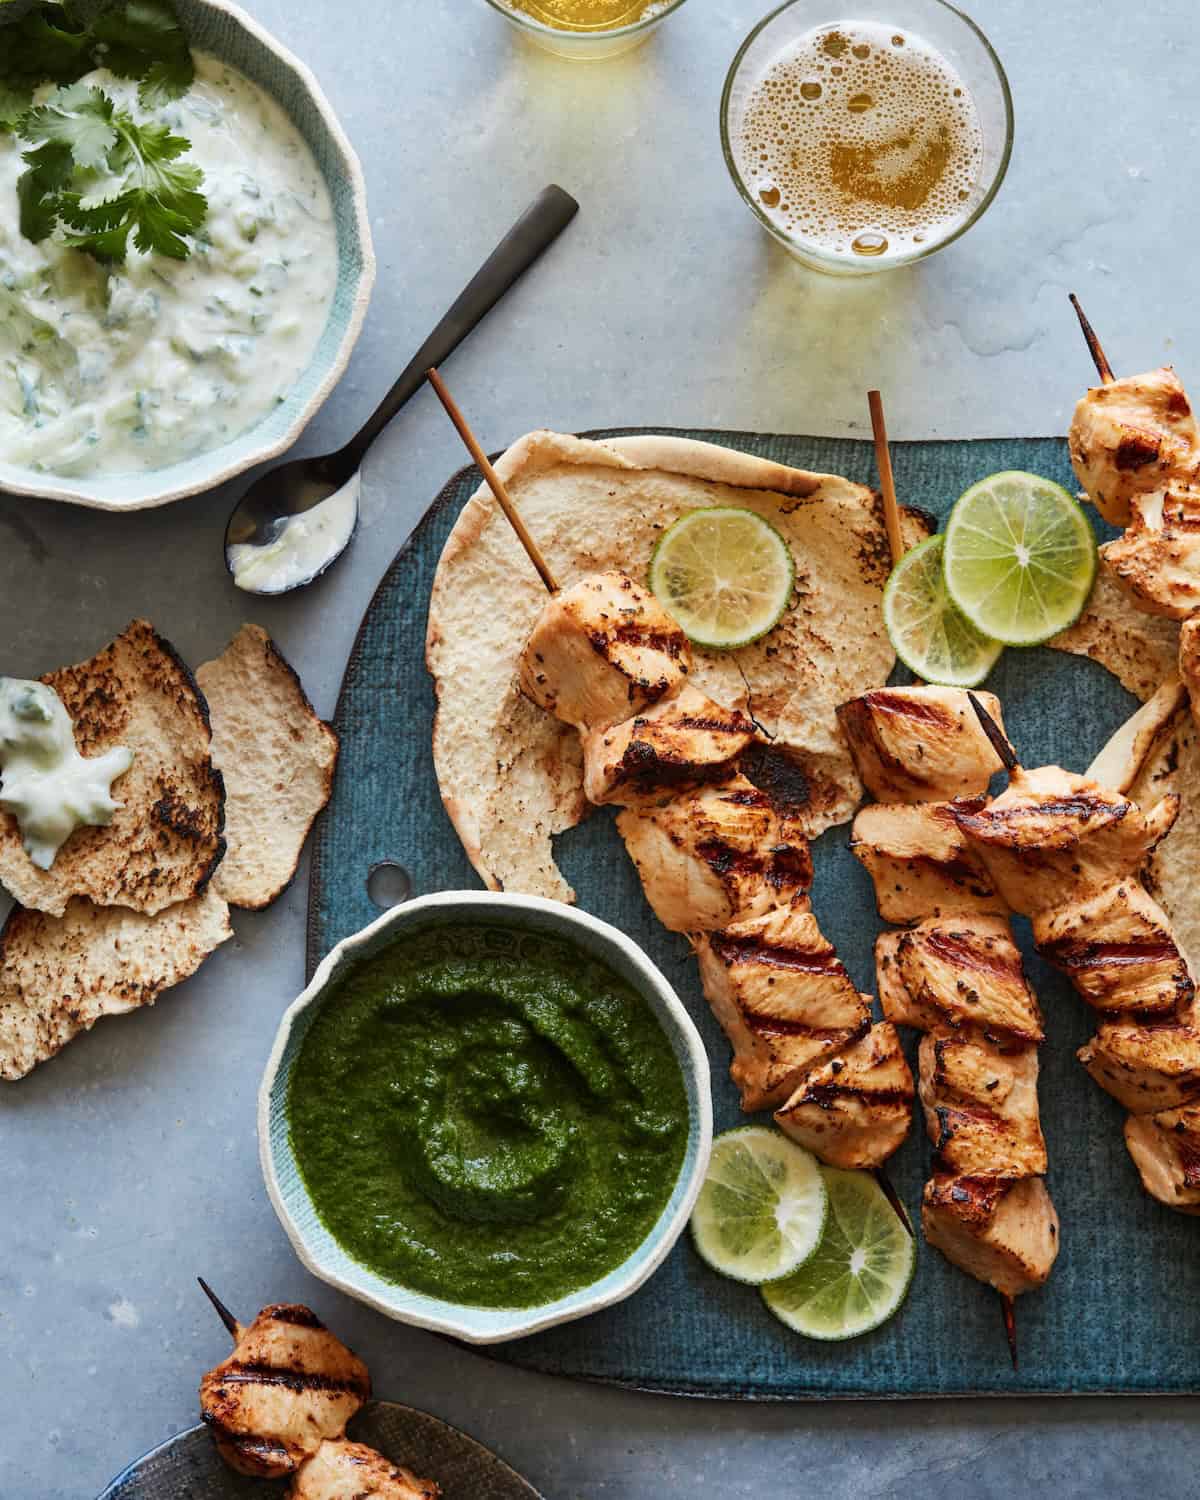 Chicken skewers on a board topped with thinly sliced limes and some pita halves, with a small bowl of cilantro mint sauce and a bowl of tzatziki on the side.